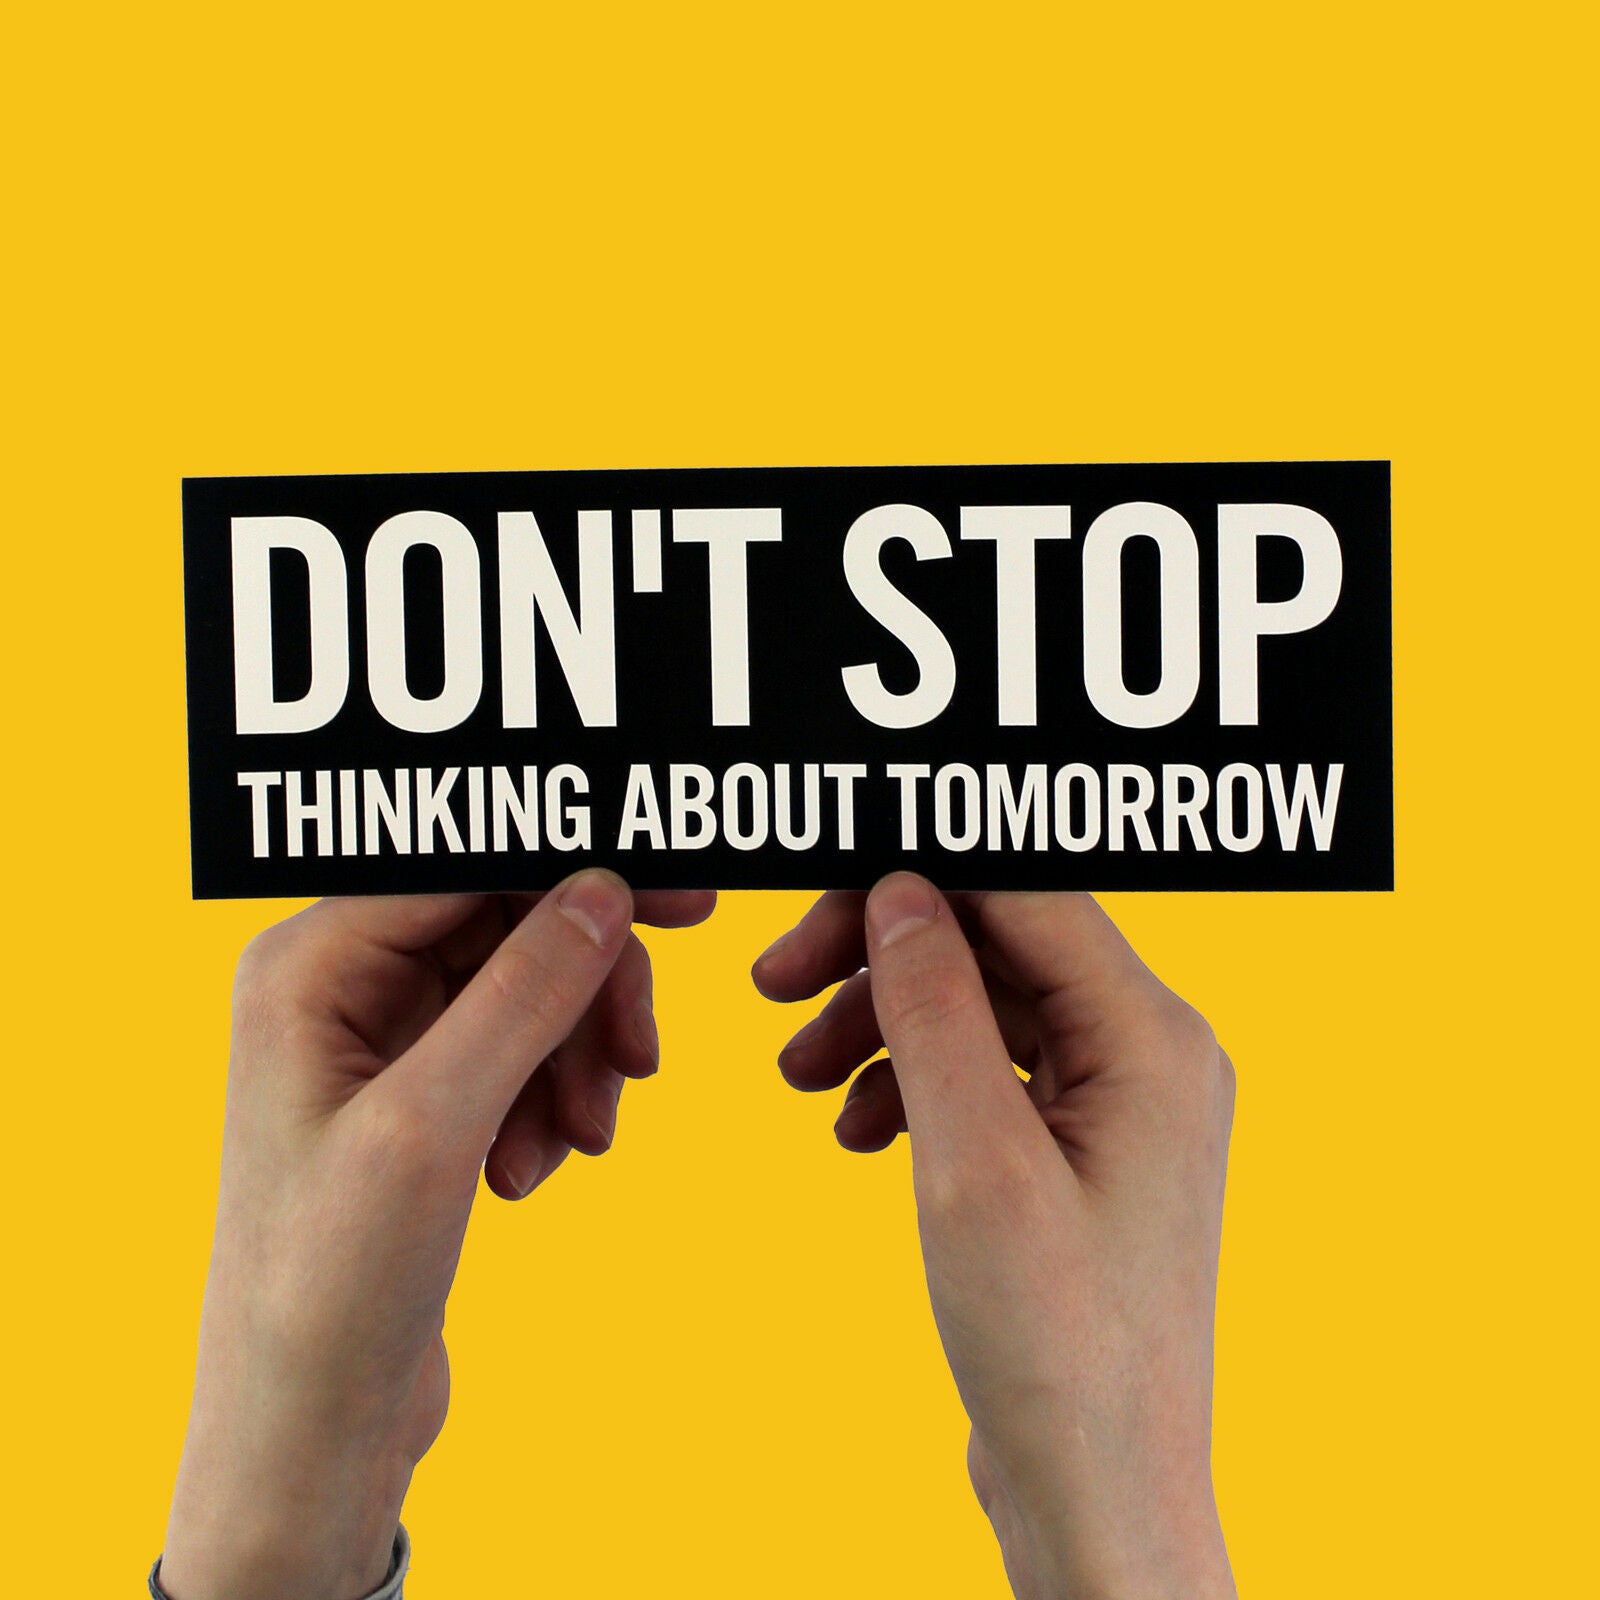 Fleetwood Mac "Don’t Stop Thinking About Tomorrow" Sticker